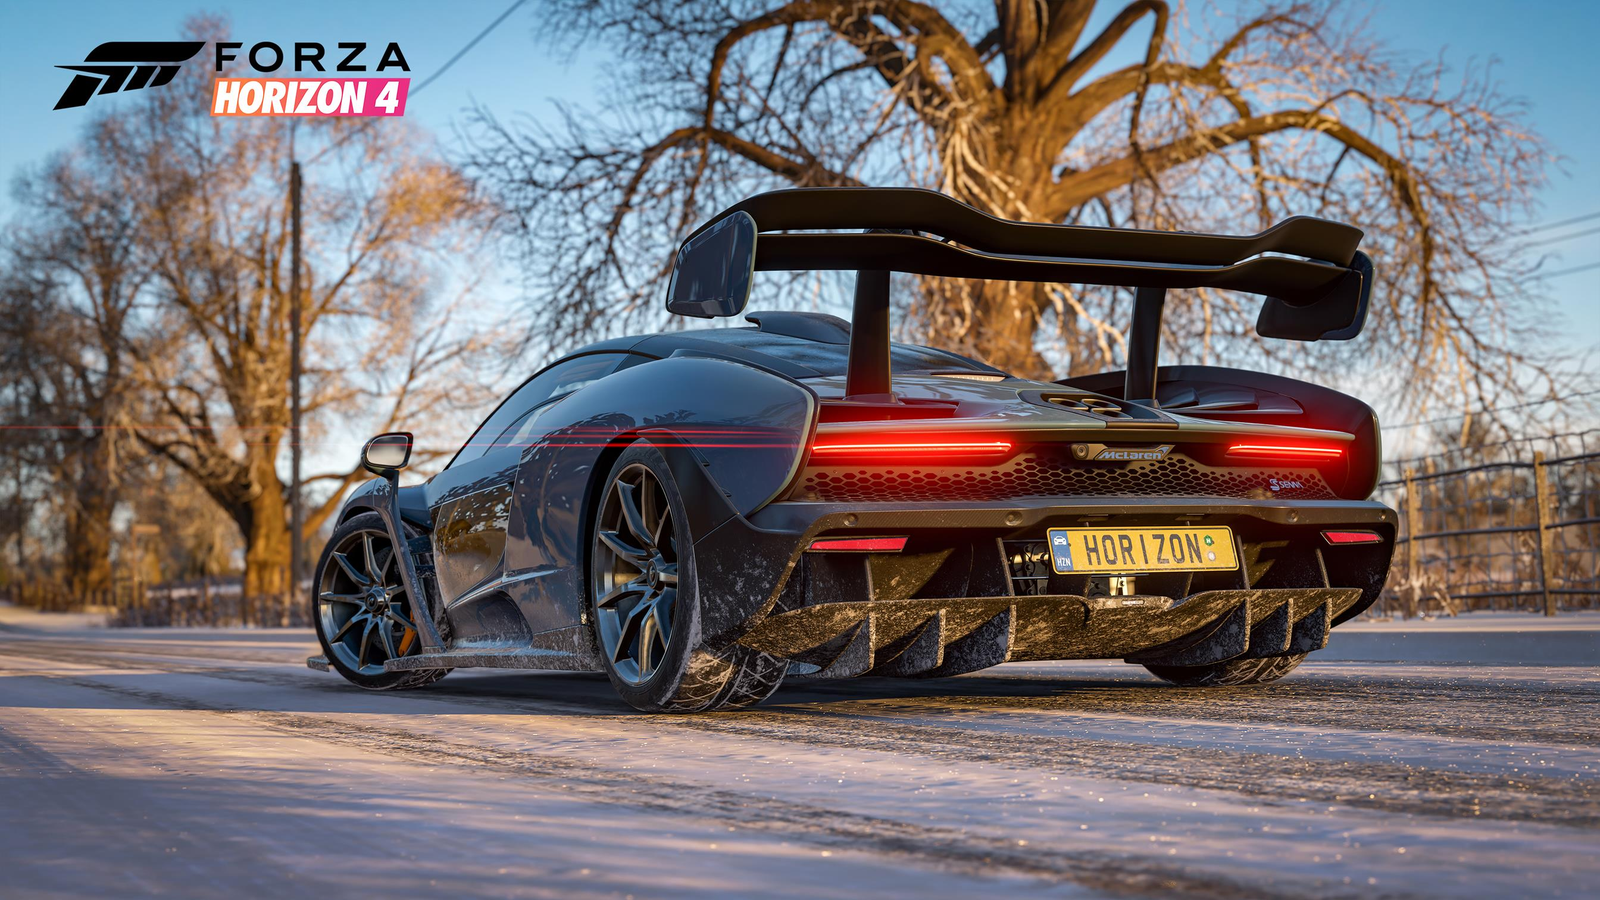 Forza Horizon 4 Demo for Xbox One and Windows PC Available for Download Now